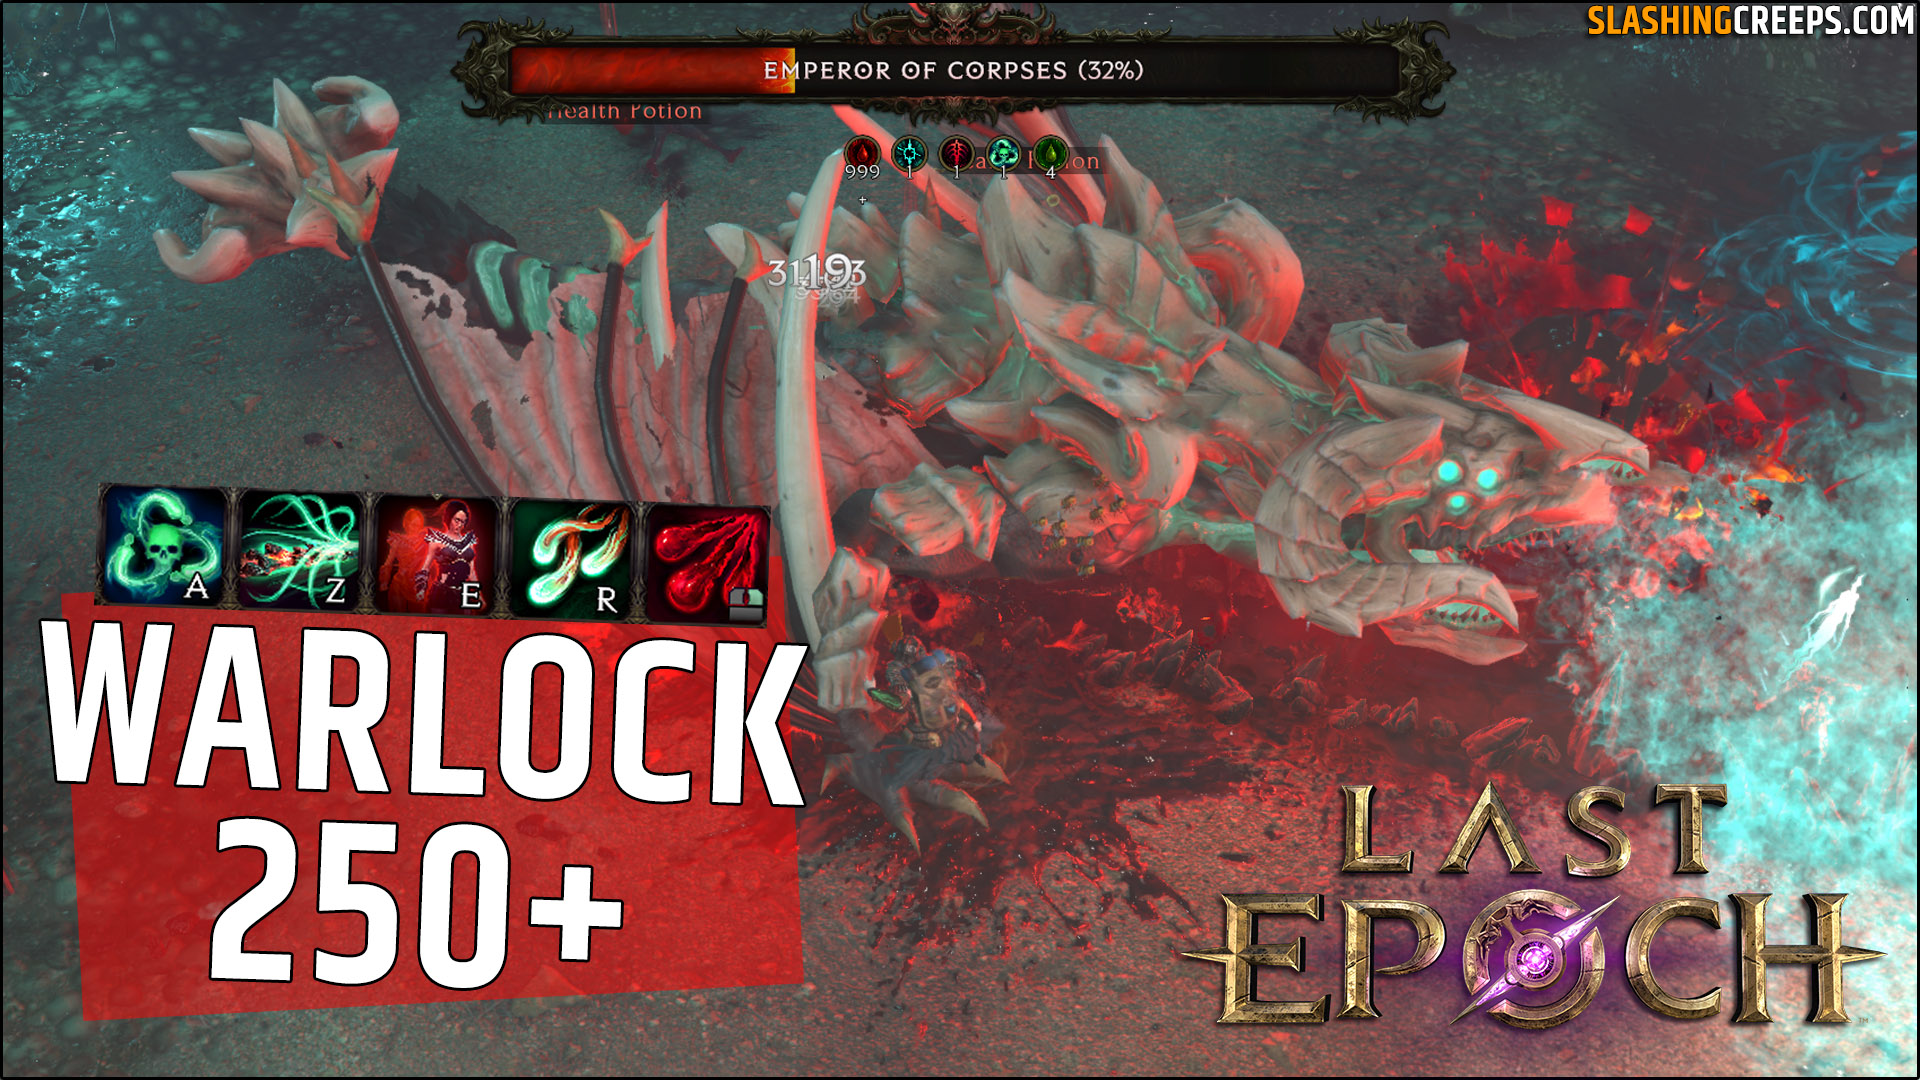 Build Occultist Endgame Last Epoch 1.0, Warlock Acolyte bleeding into corruption 250 and up